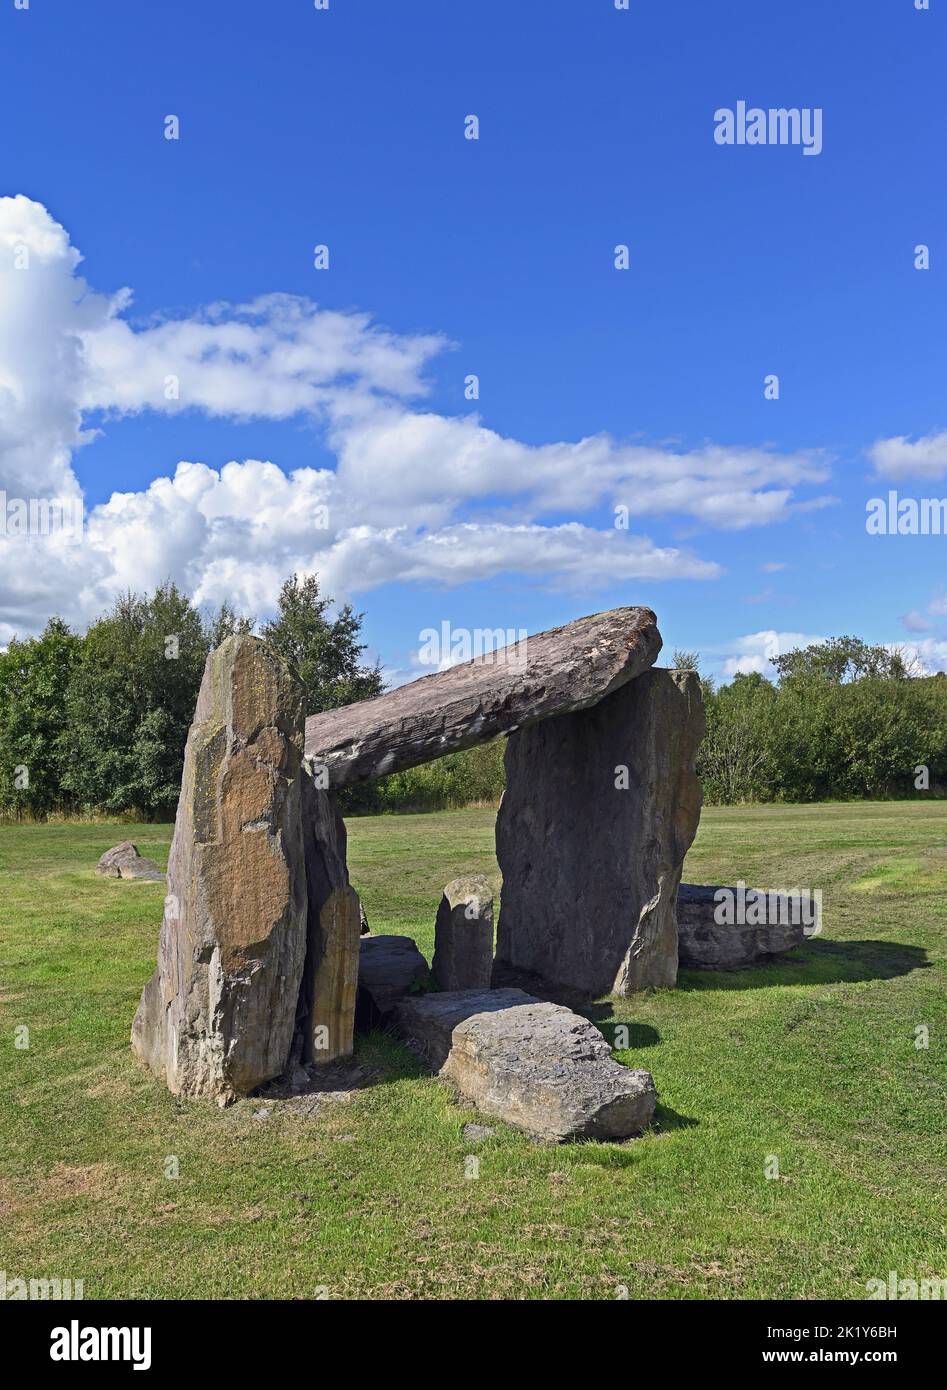 'Comet Collisions'. outdoor artwork by Charles Jencks. Crawick Multiverse, Sanquhar, Dumfries and Galloway, Scotland, United Kingdom, Europe. Stock Photo